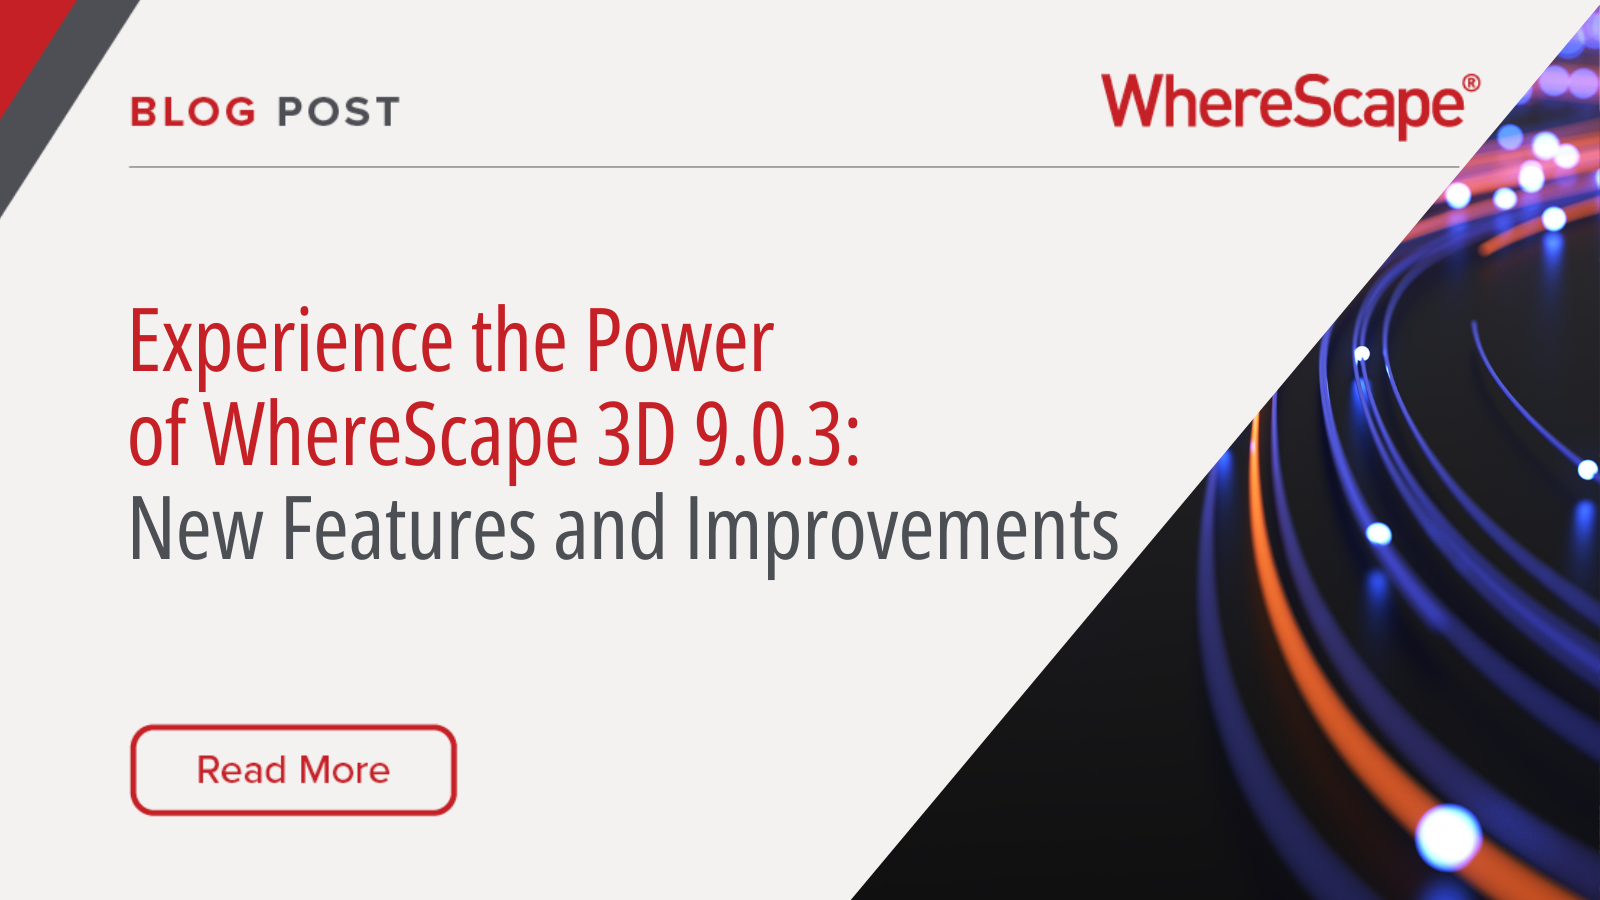 Experience the Power of WhereScape 3D 9.0.3: New Features and Improvements